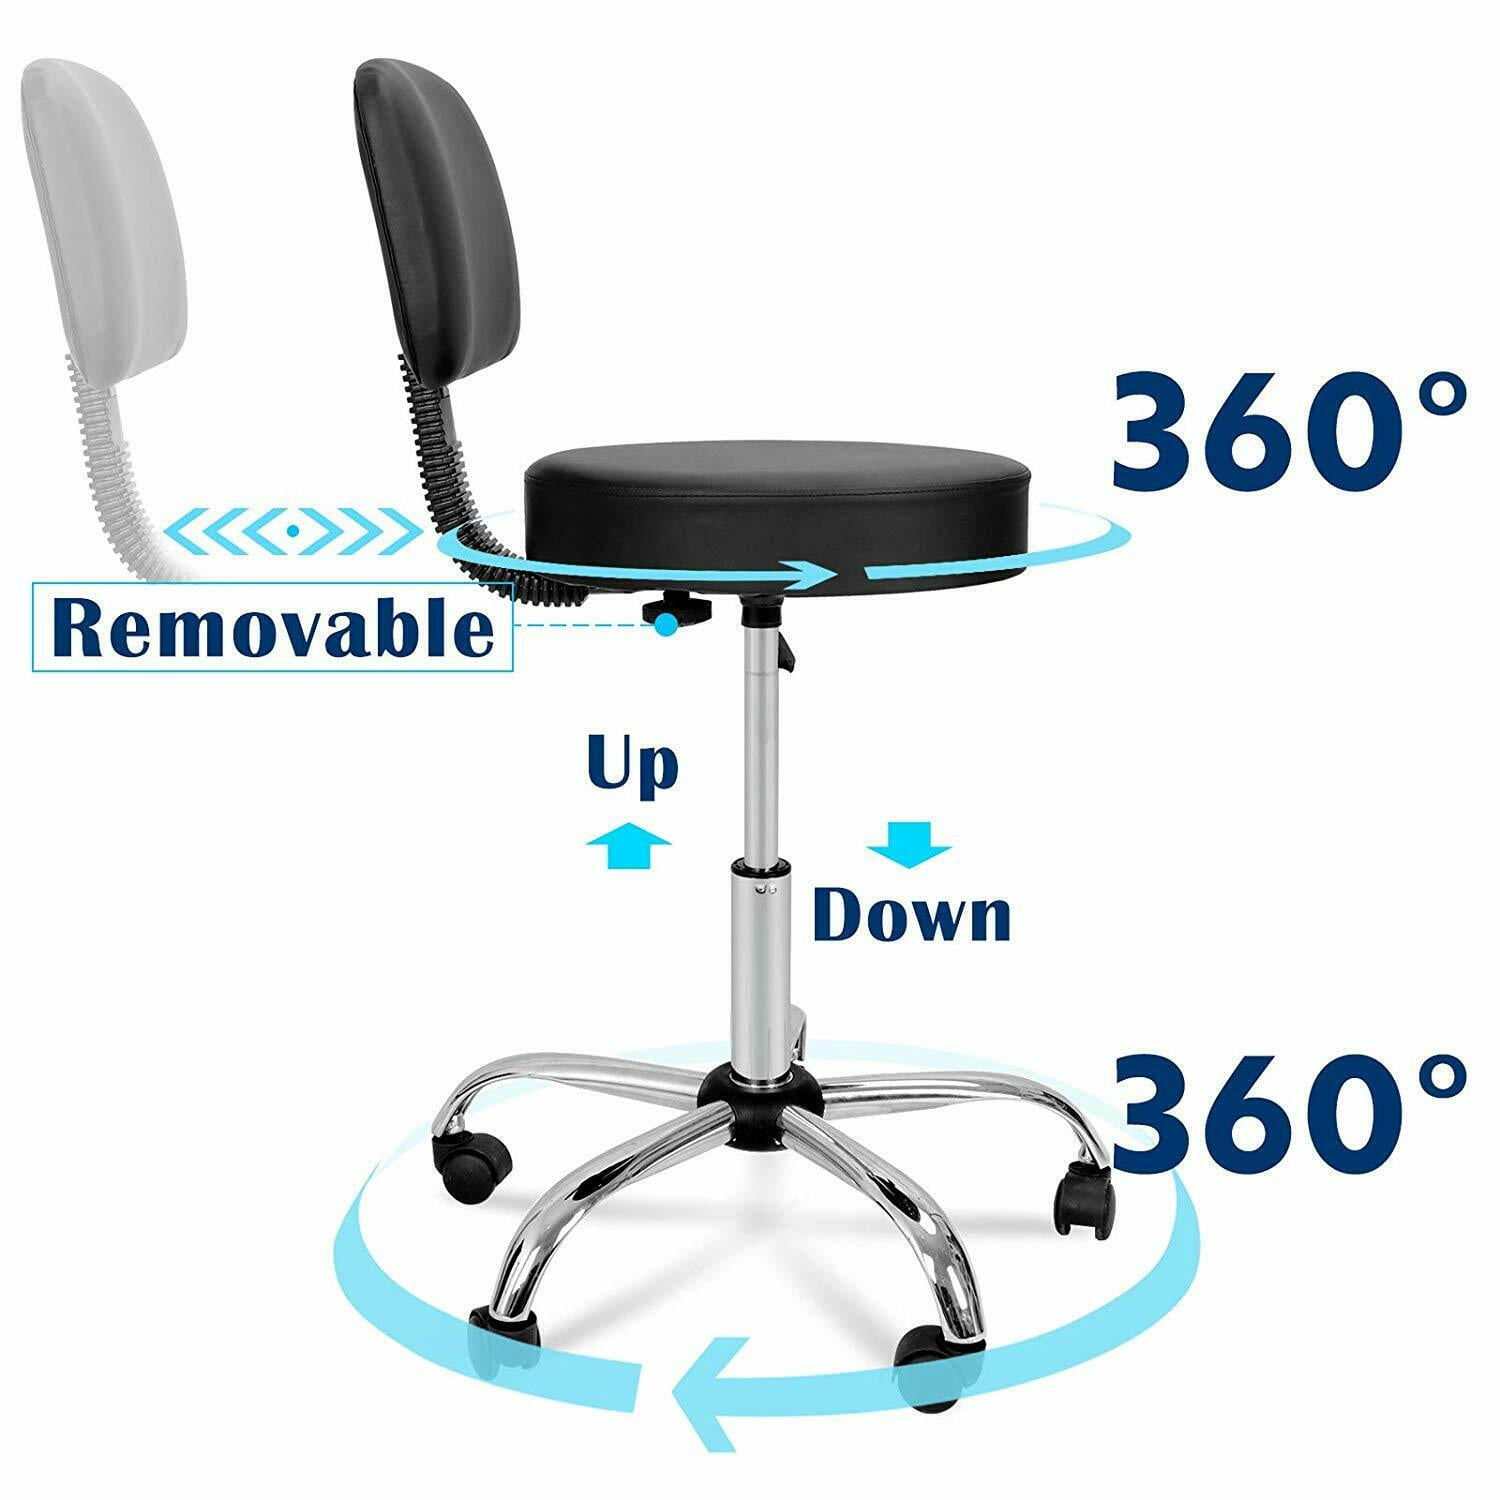 360 Degree Rotation,Comfortable Chair with Armrest,Max Load 150kg FENGFAN Swivel Chair,Beauty Roller Stool,Adjustable Height Color : Brown with Wheels 